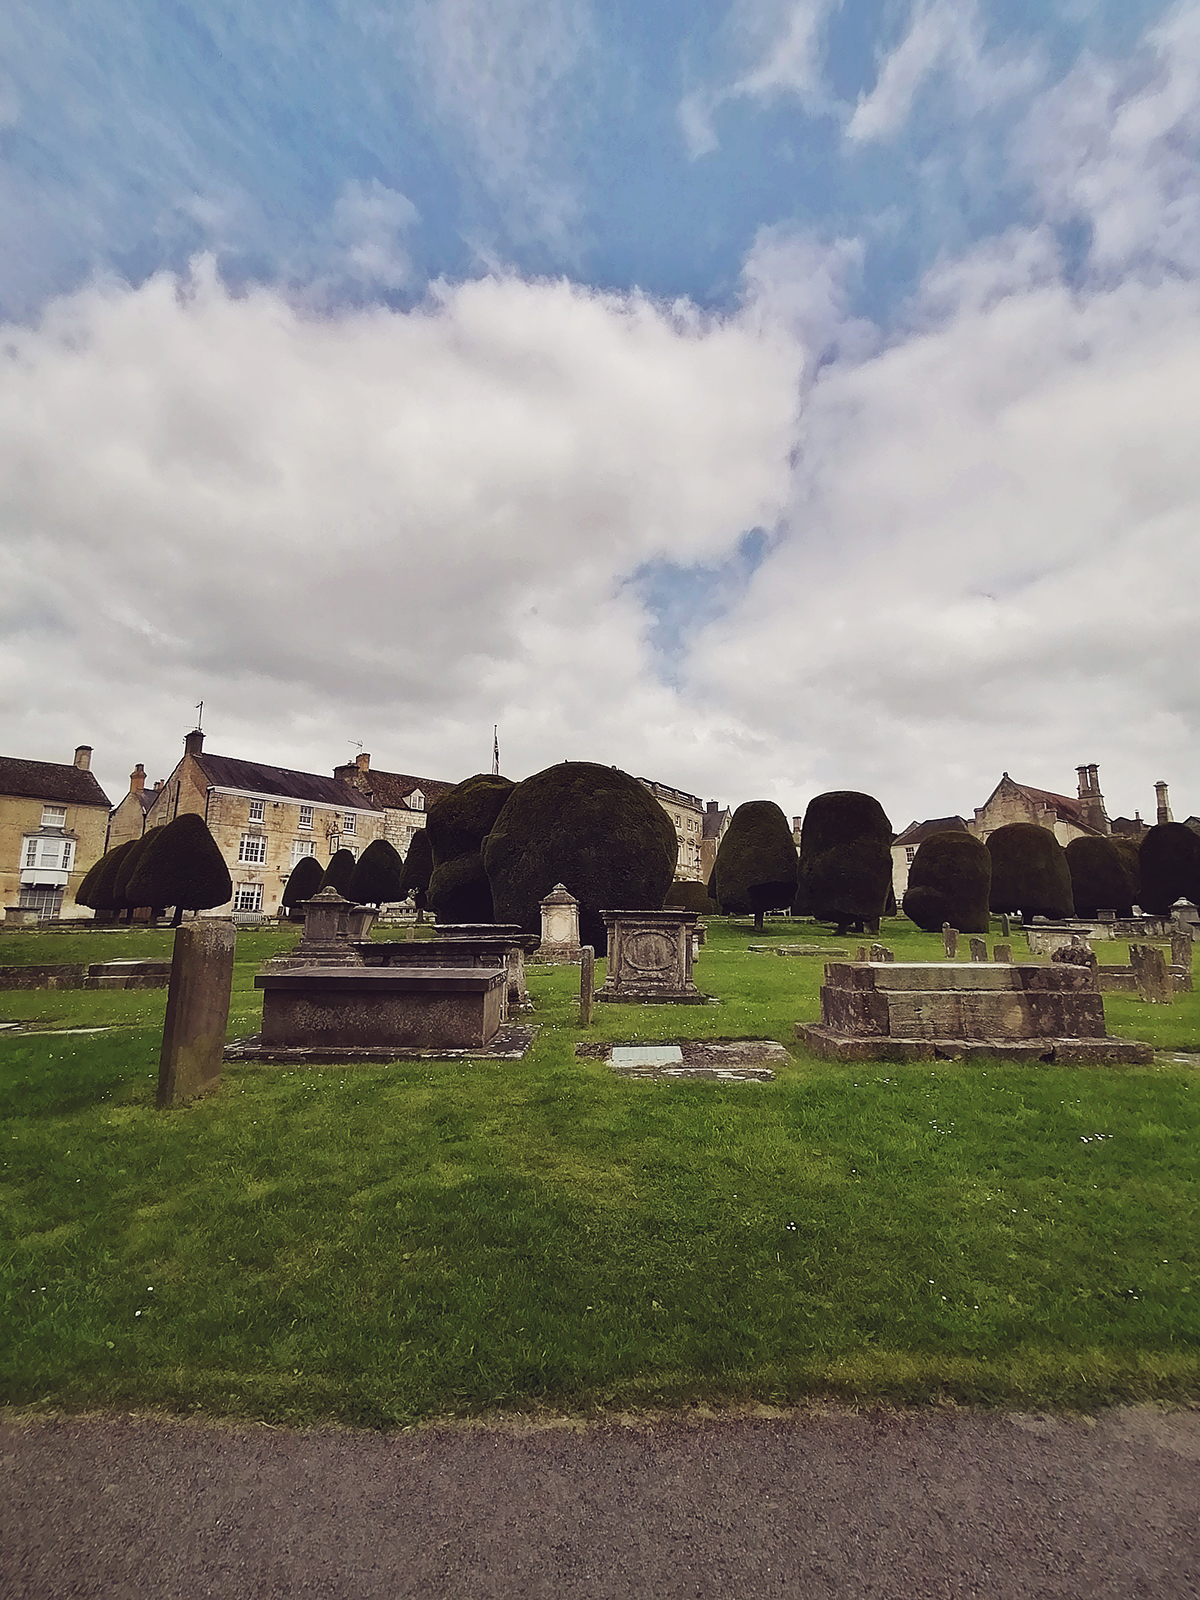 Cemetery in Painswick, Cotswolds